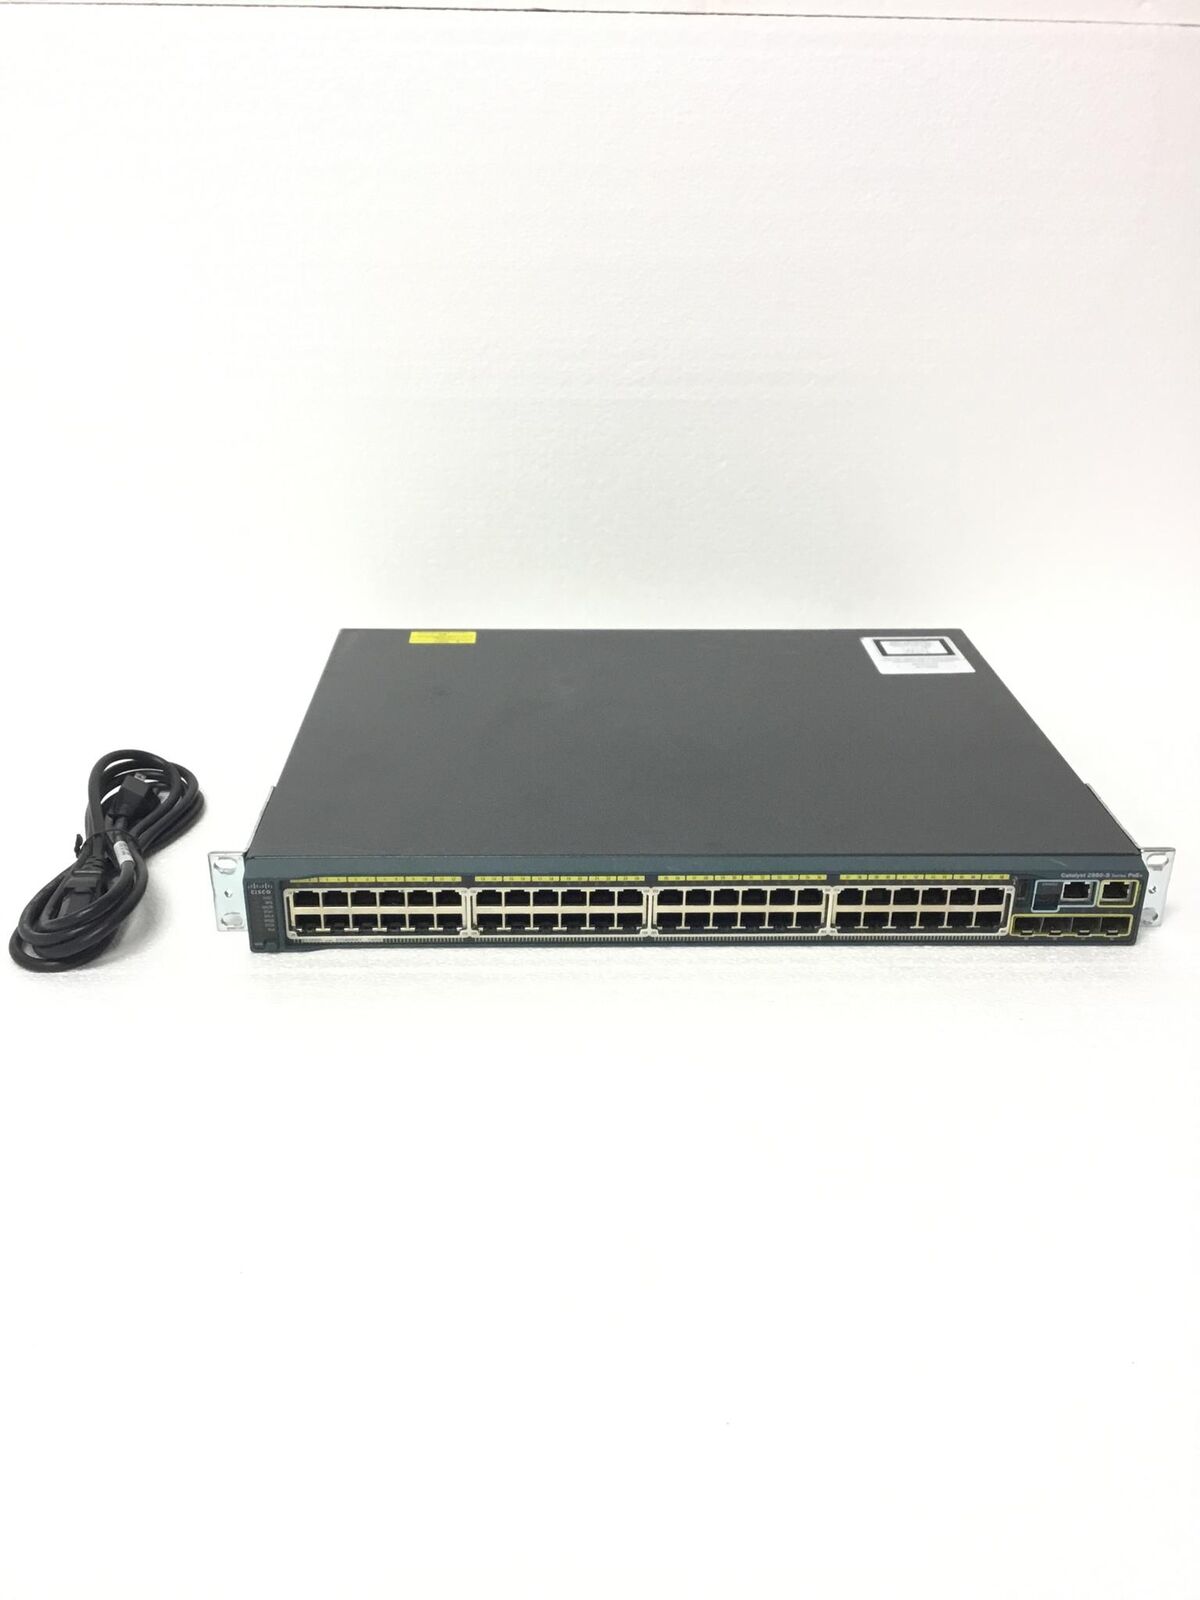 CISCO Catalyst 2960-S 48 Poe+WS-C2960S-48FPS-L V02 Network Switch w/C2960S-STACK